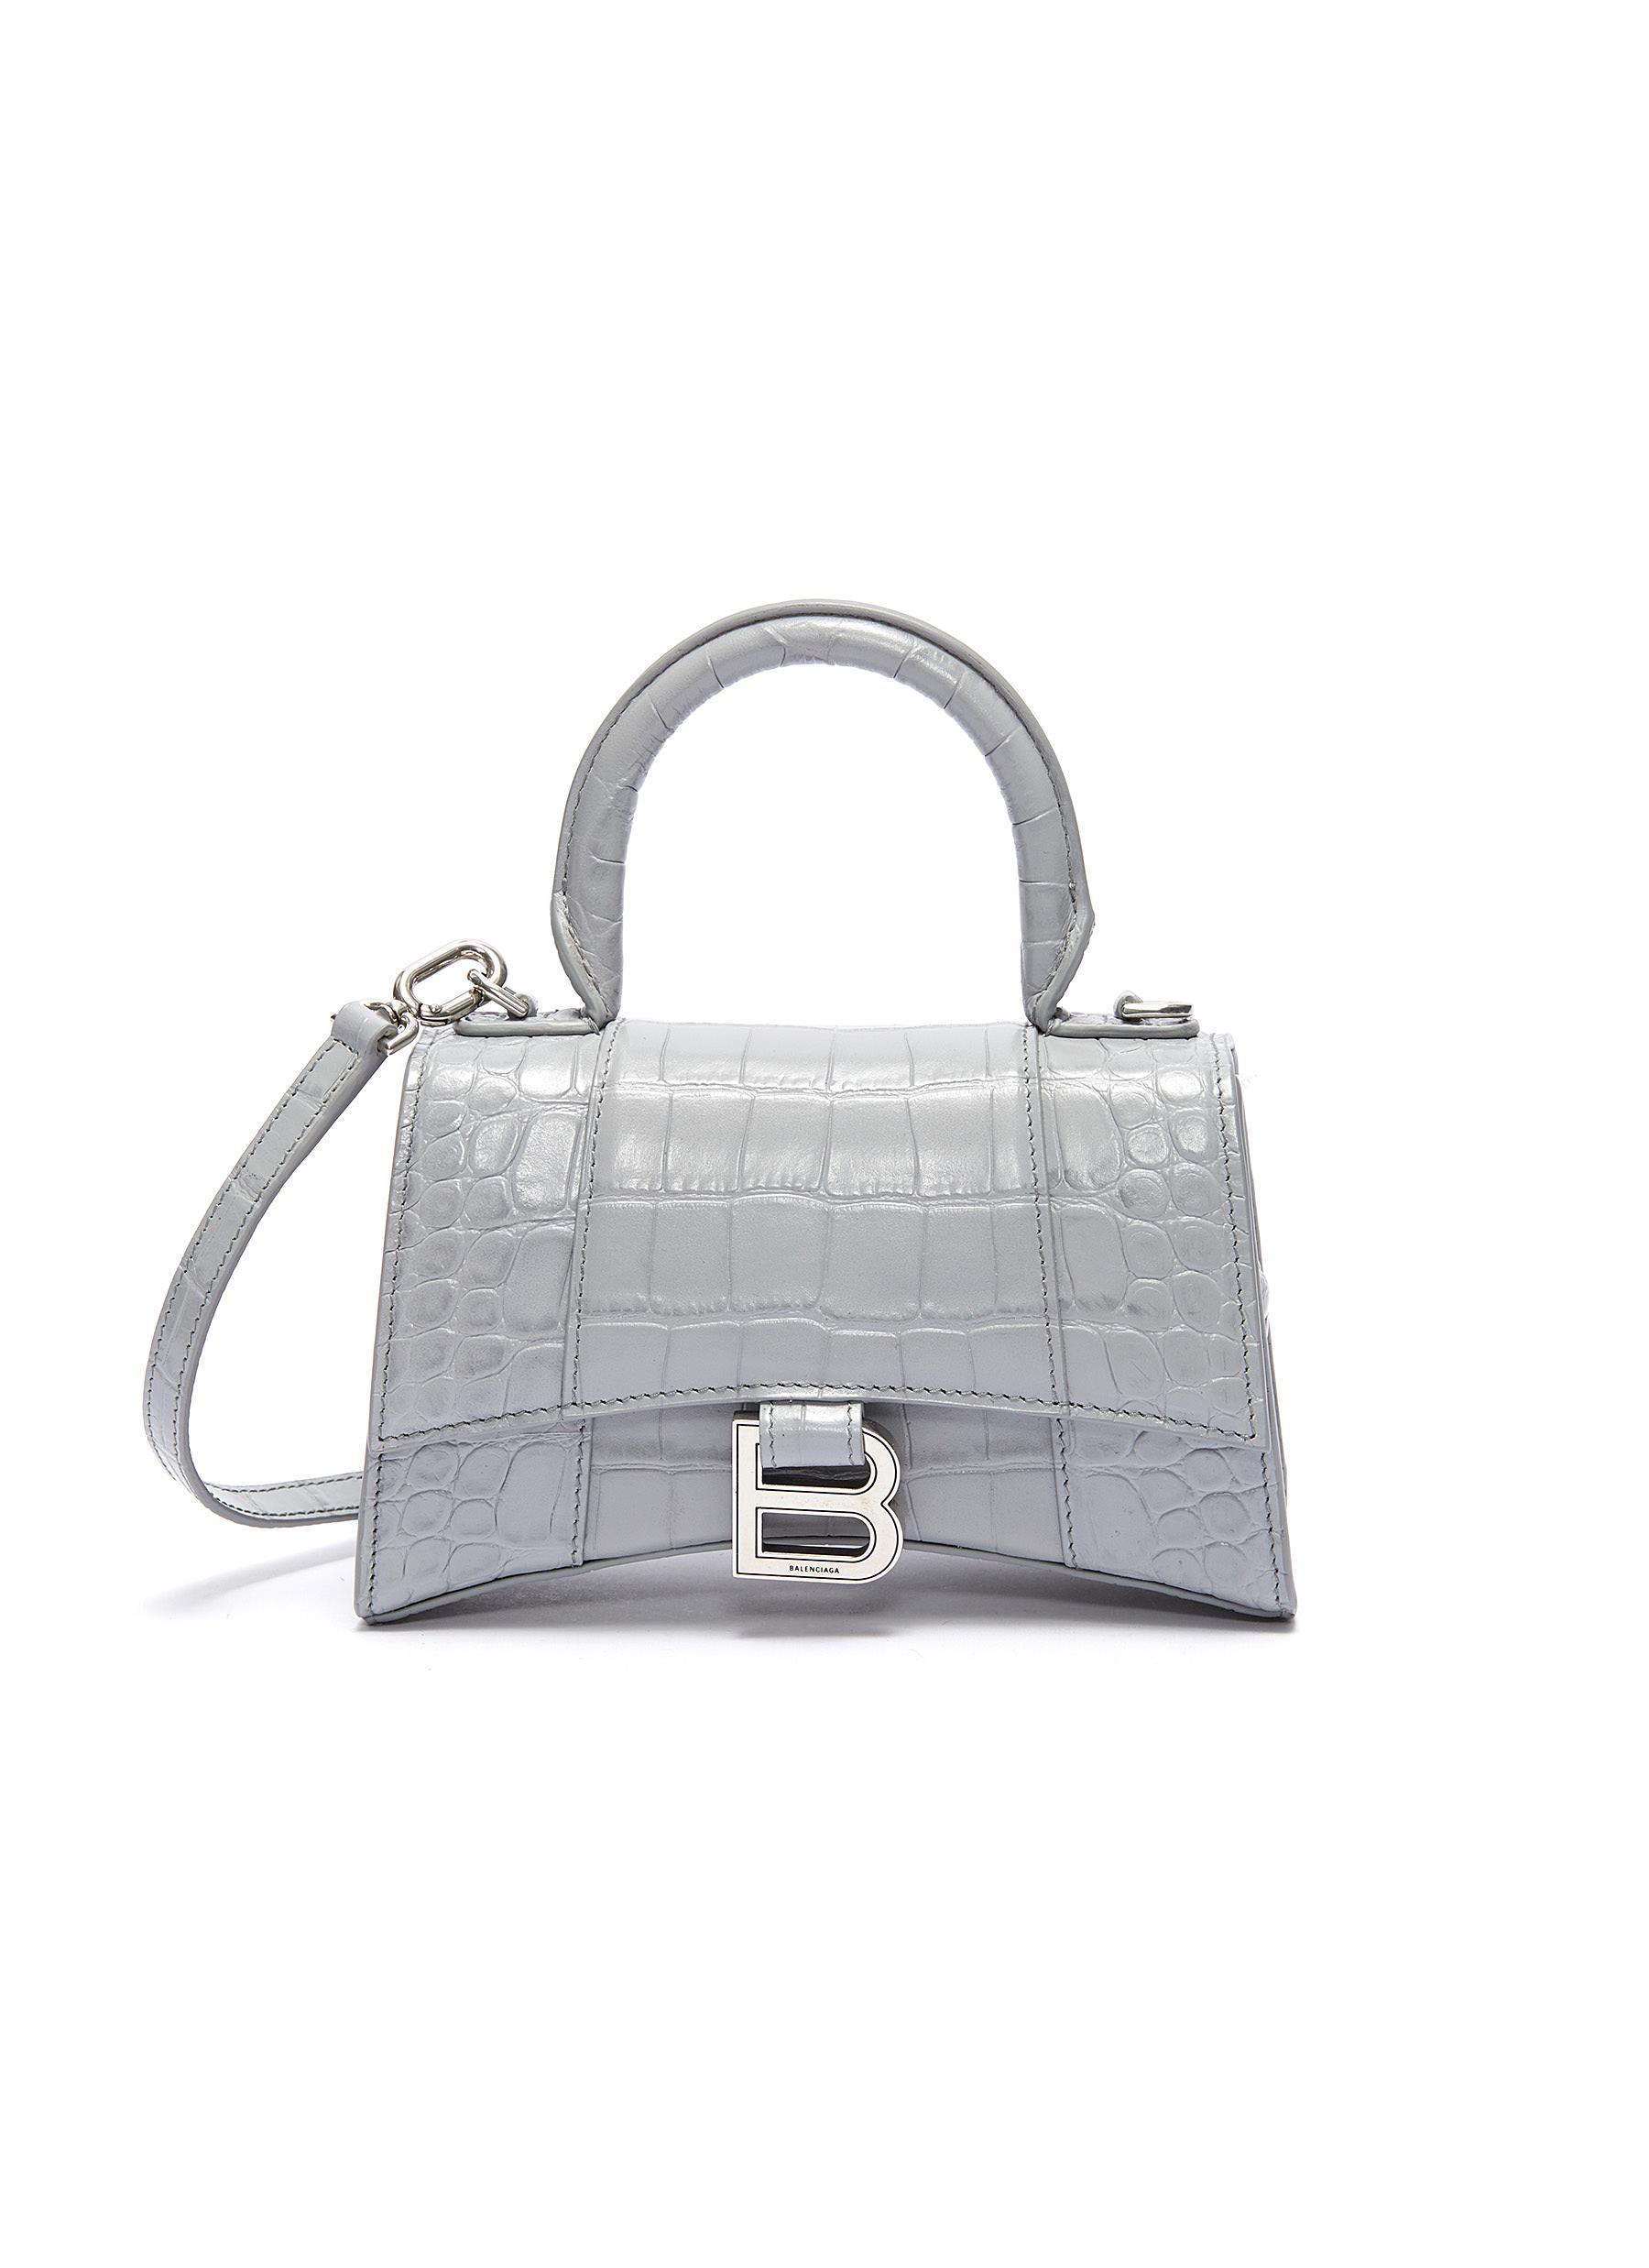 Balenciaga 'hourglass' Xs Top Handle Croc Embossed Leather Bag in Gray |  Lyst